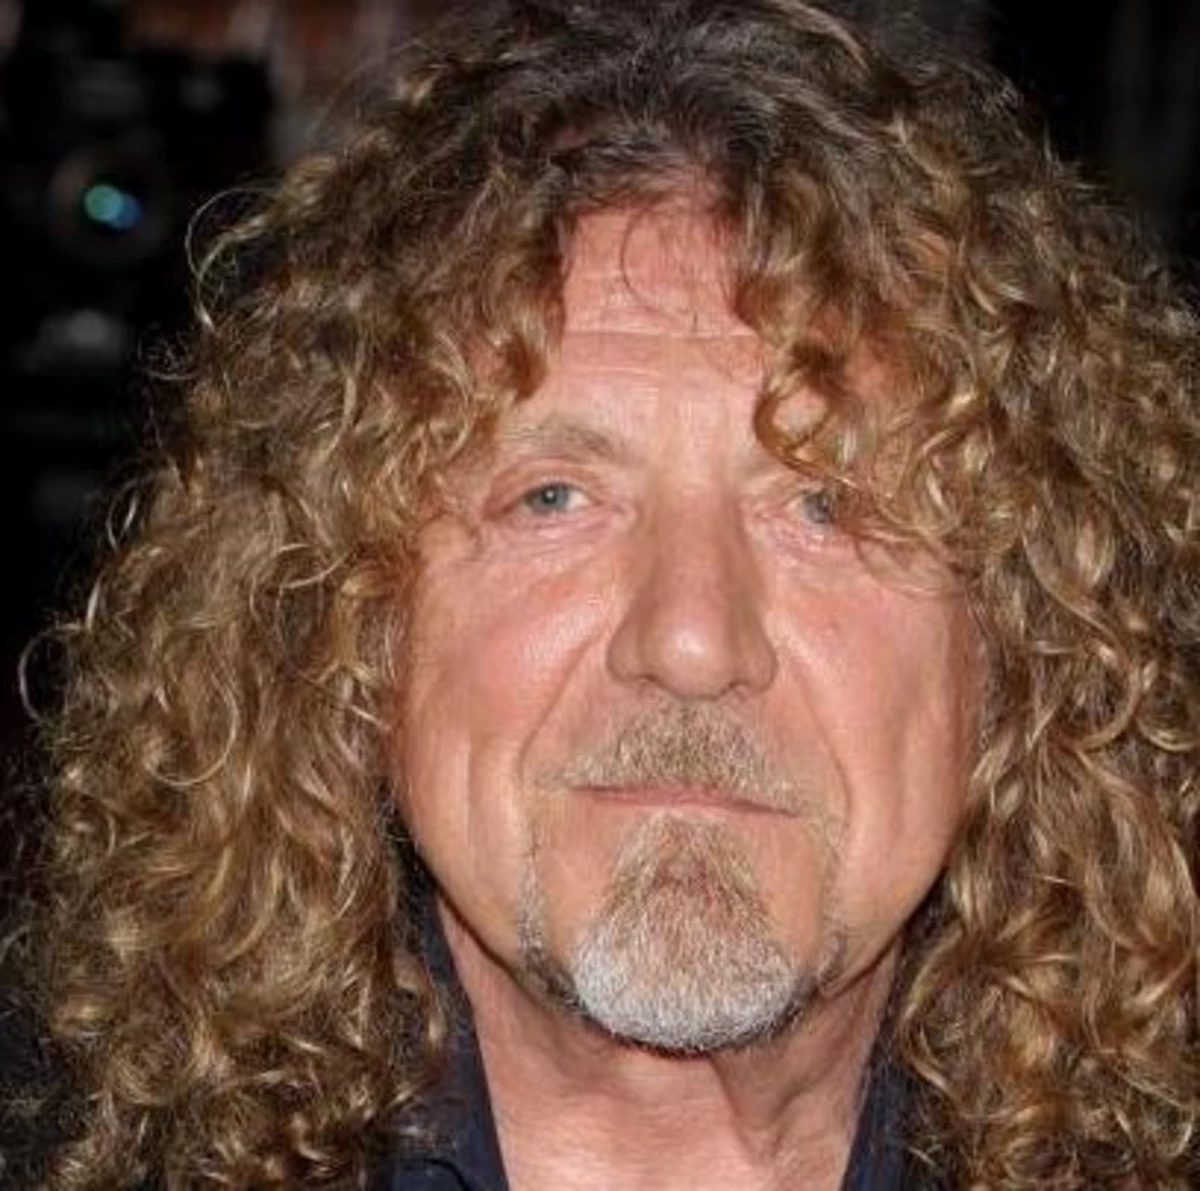 Robert Plant Talks How he Almost Gave it All up to be a Teacher